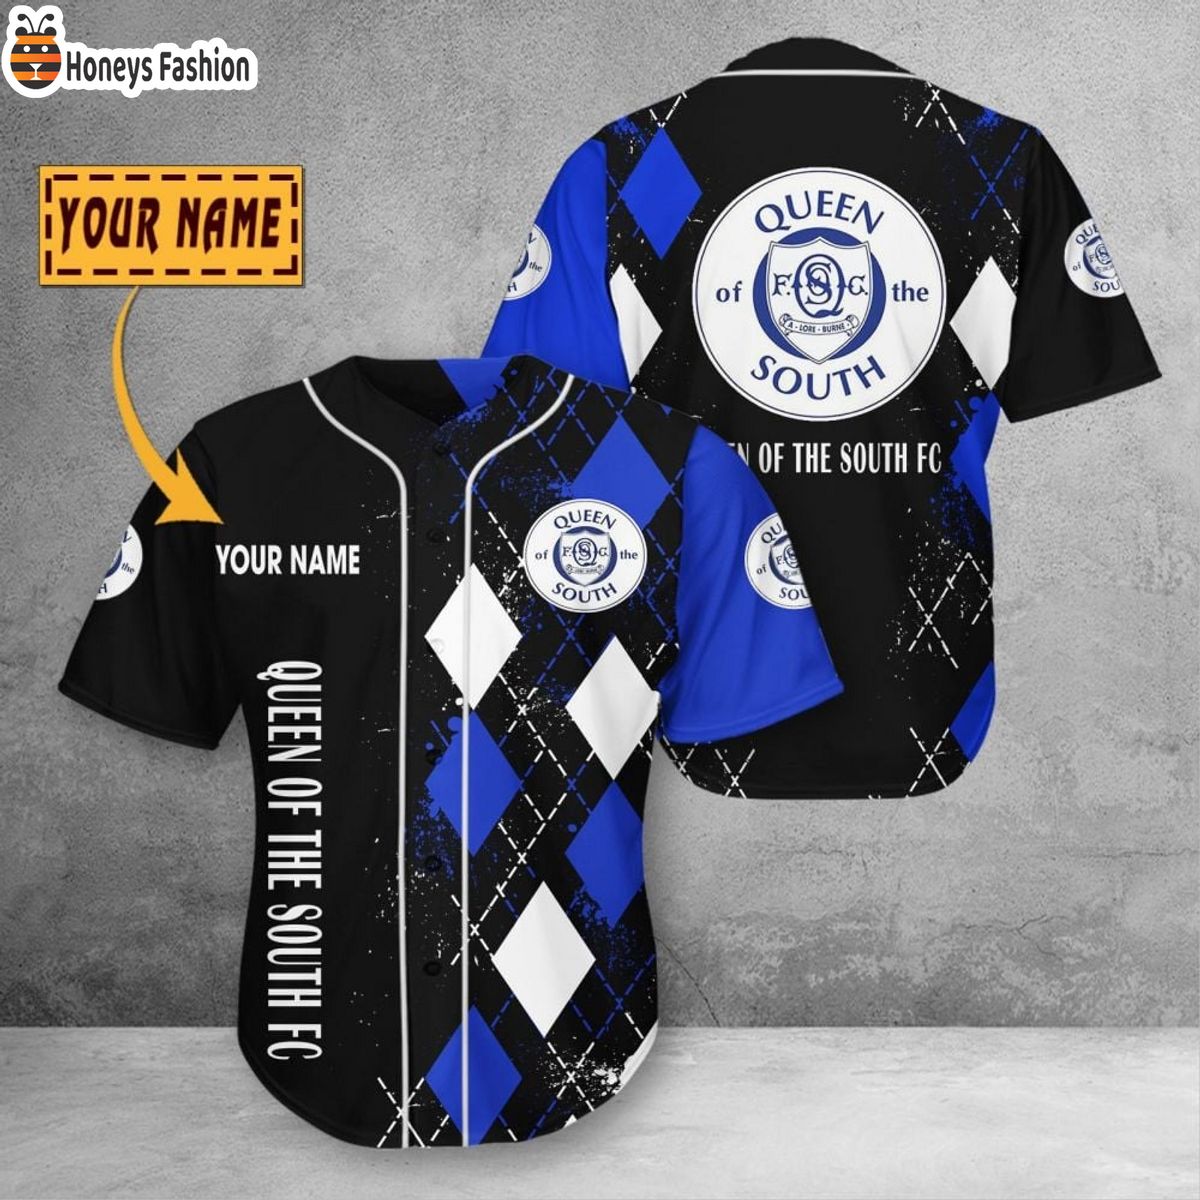 Personalized Queen of the South F.C. Baseball Jersey